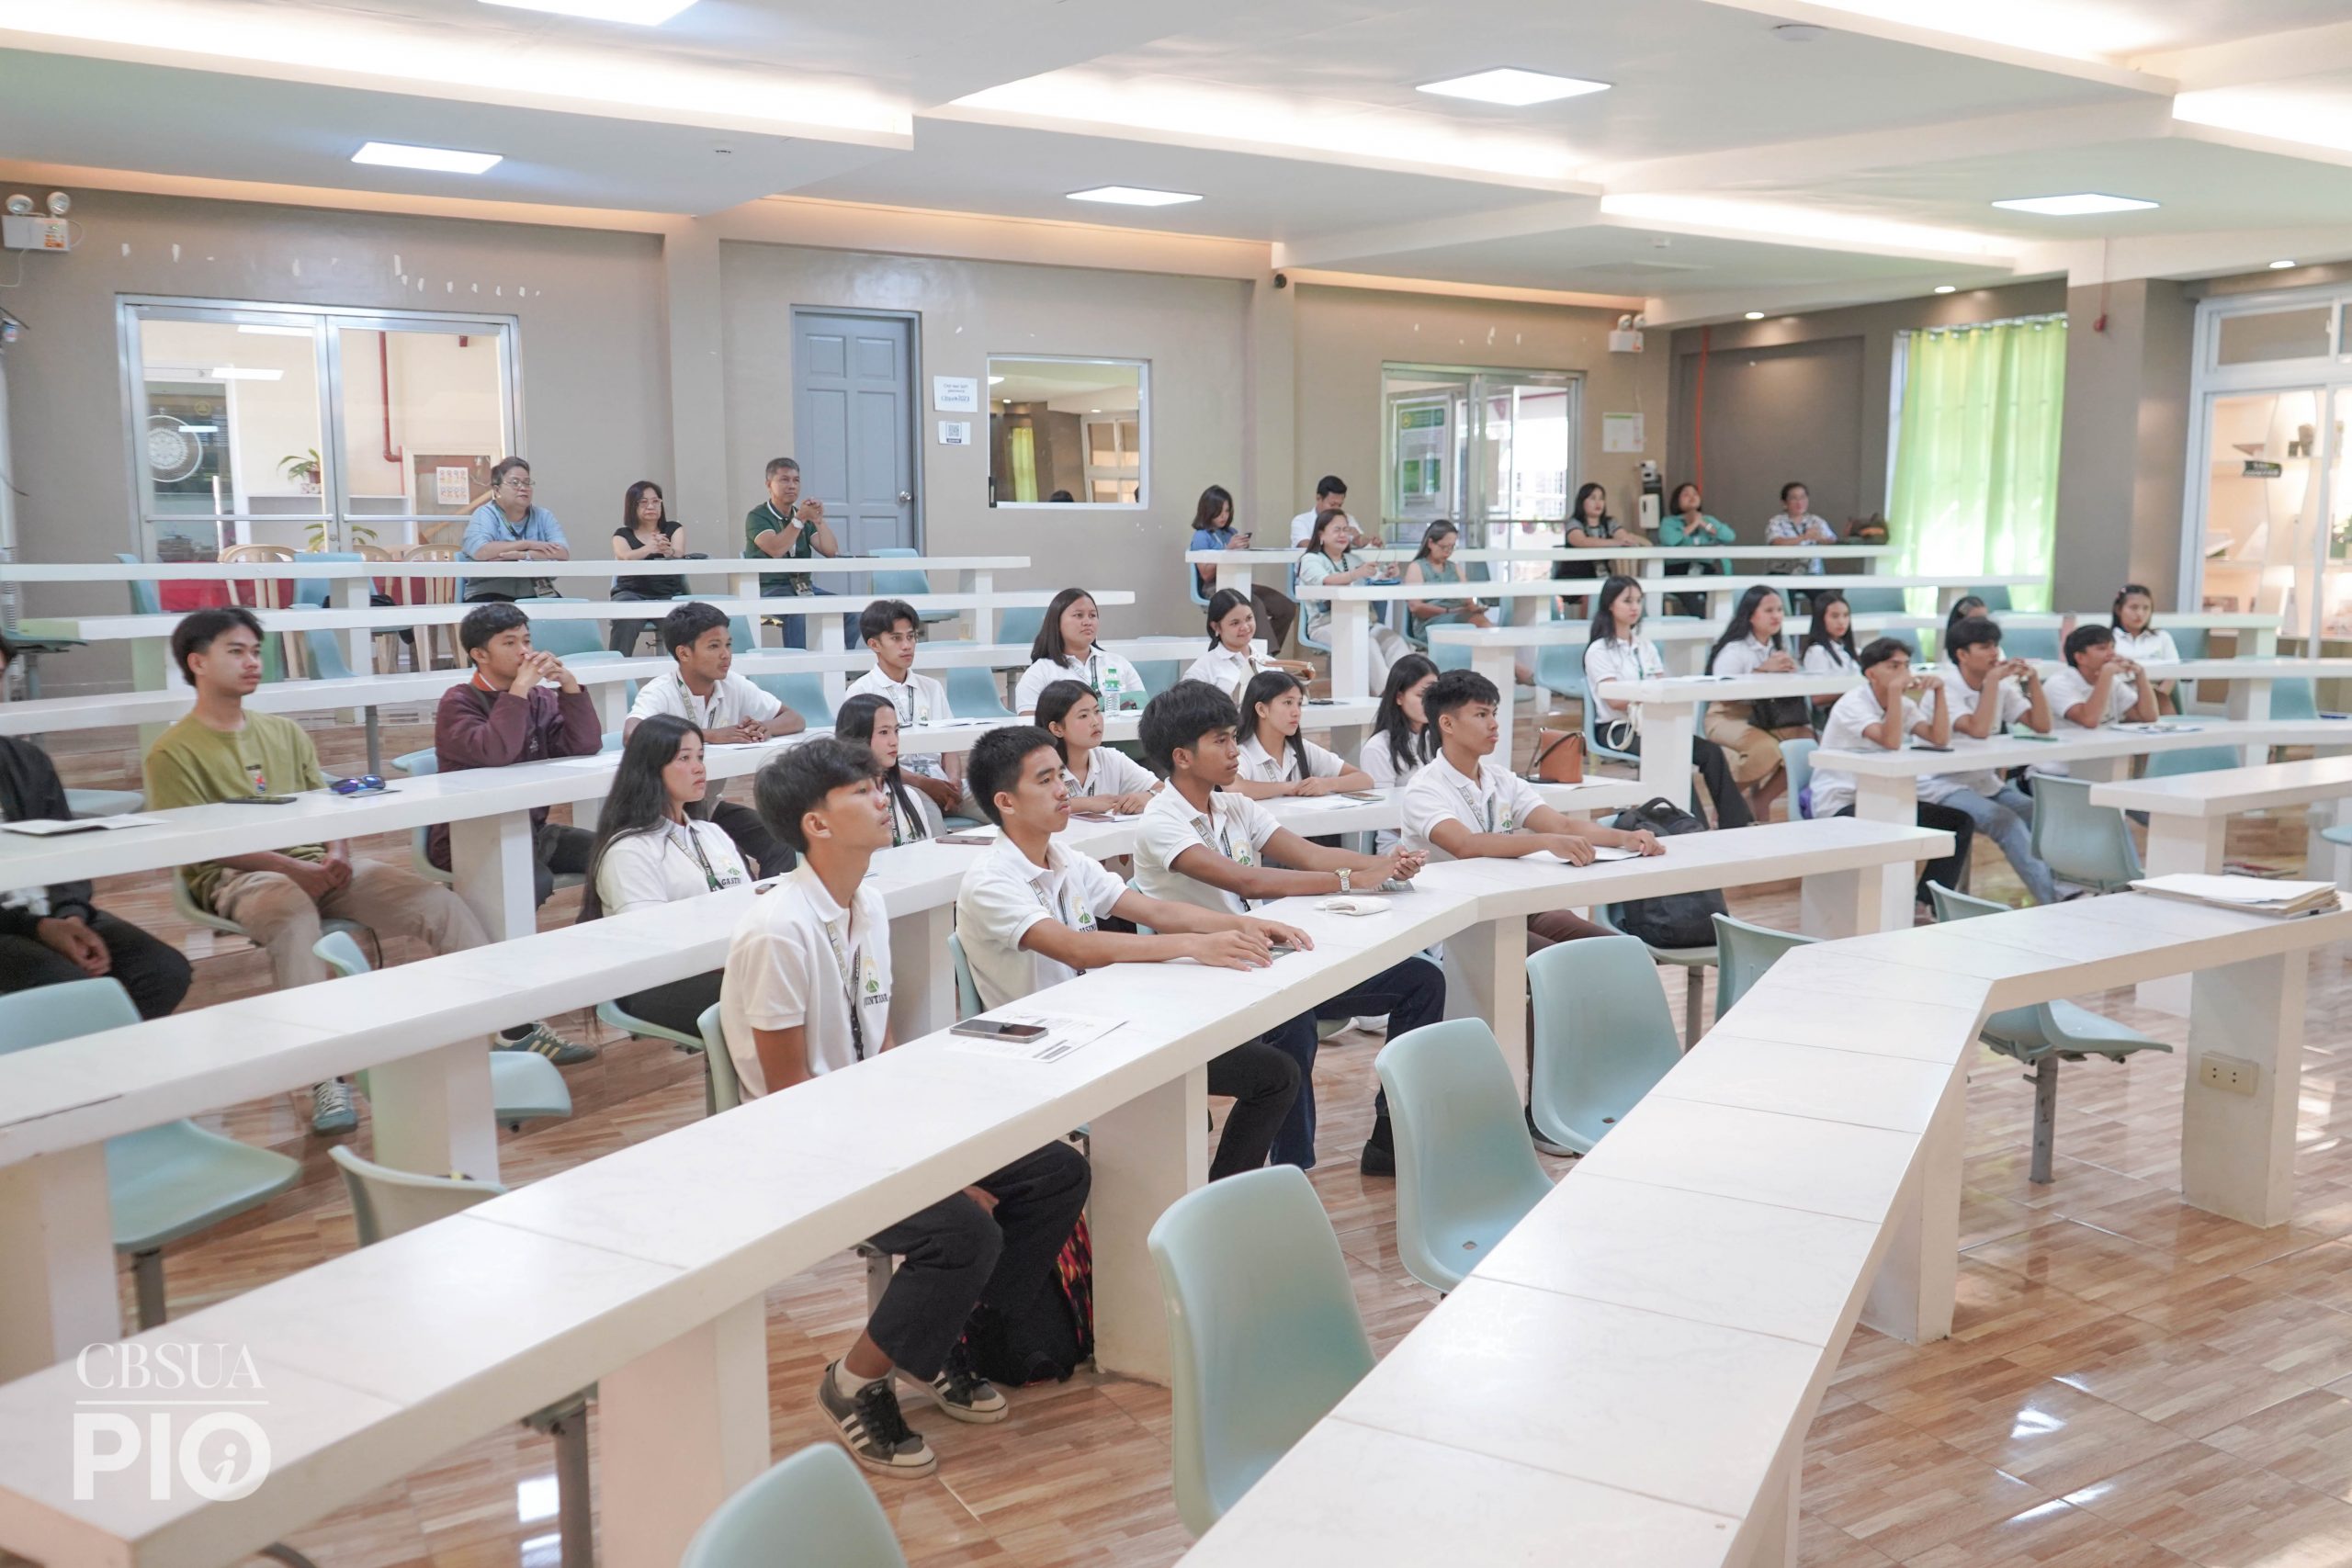 CBSUA WELCOMES 25 OJT STUDENTS FROM PILI PAROCHIAL SCHOOL